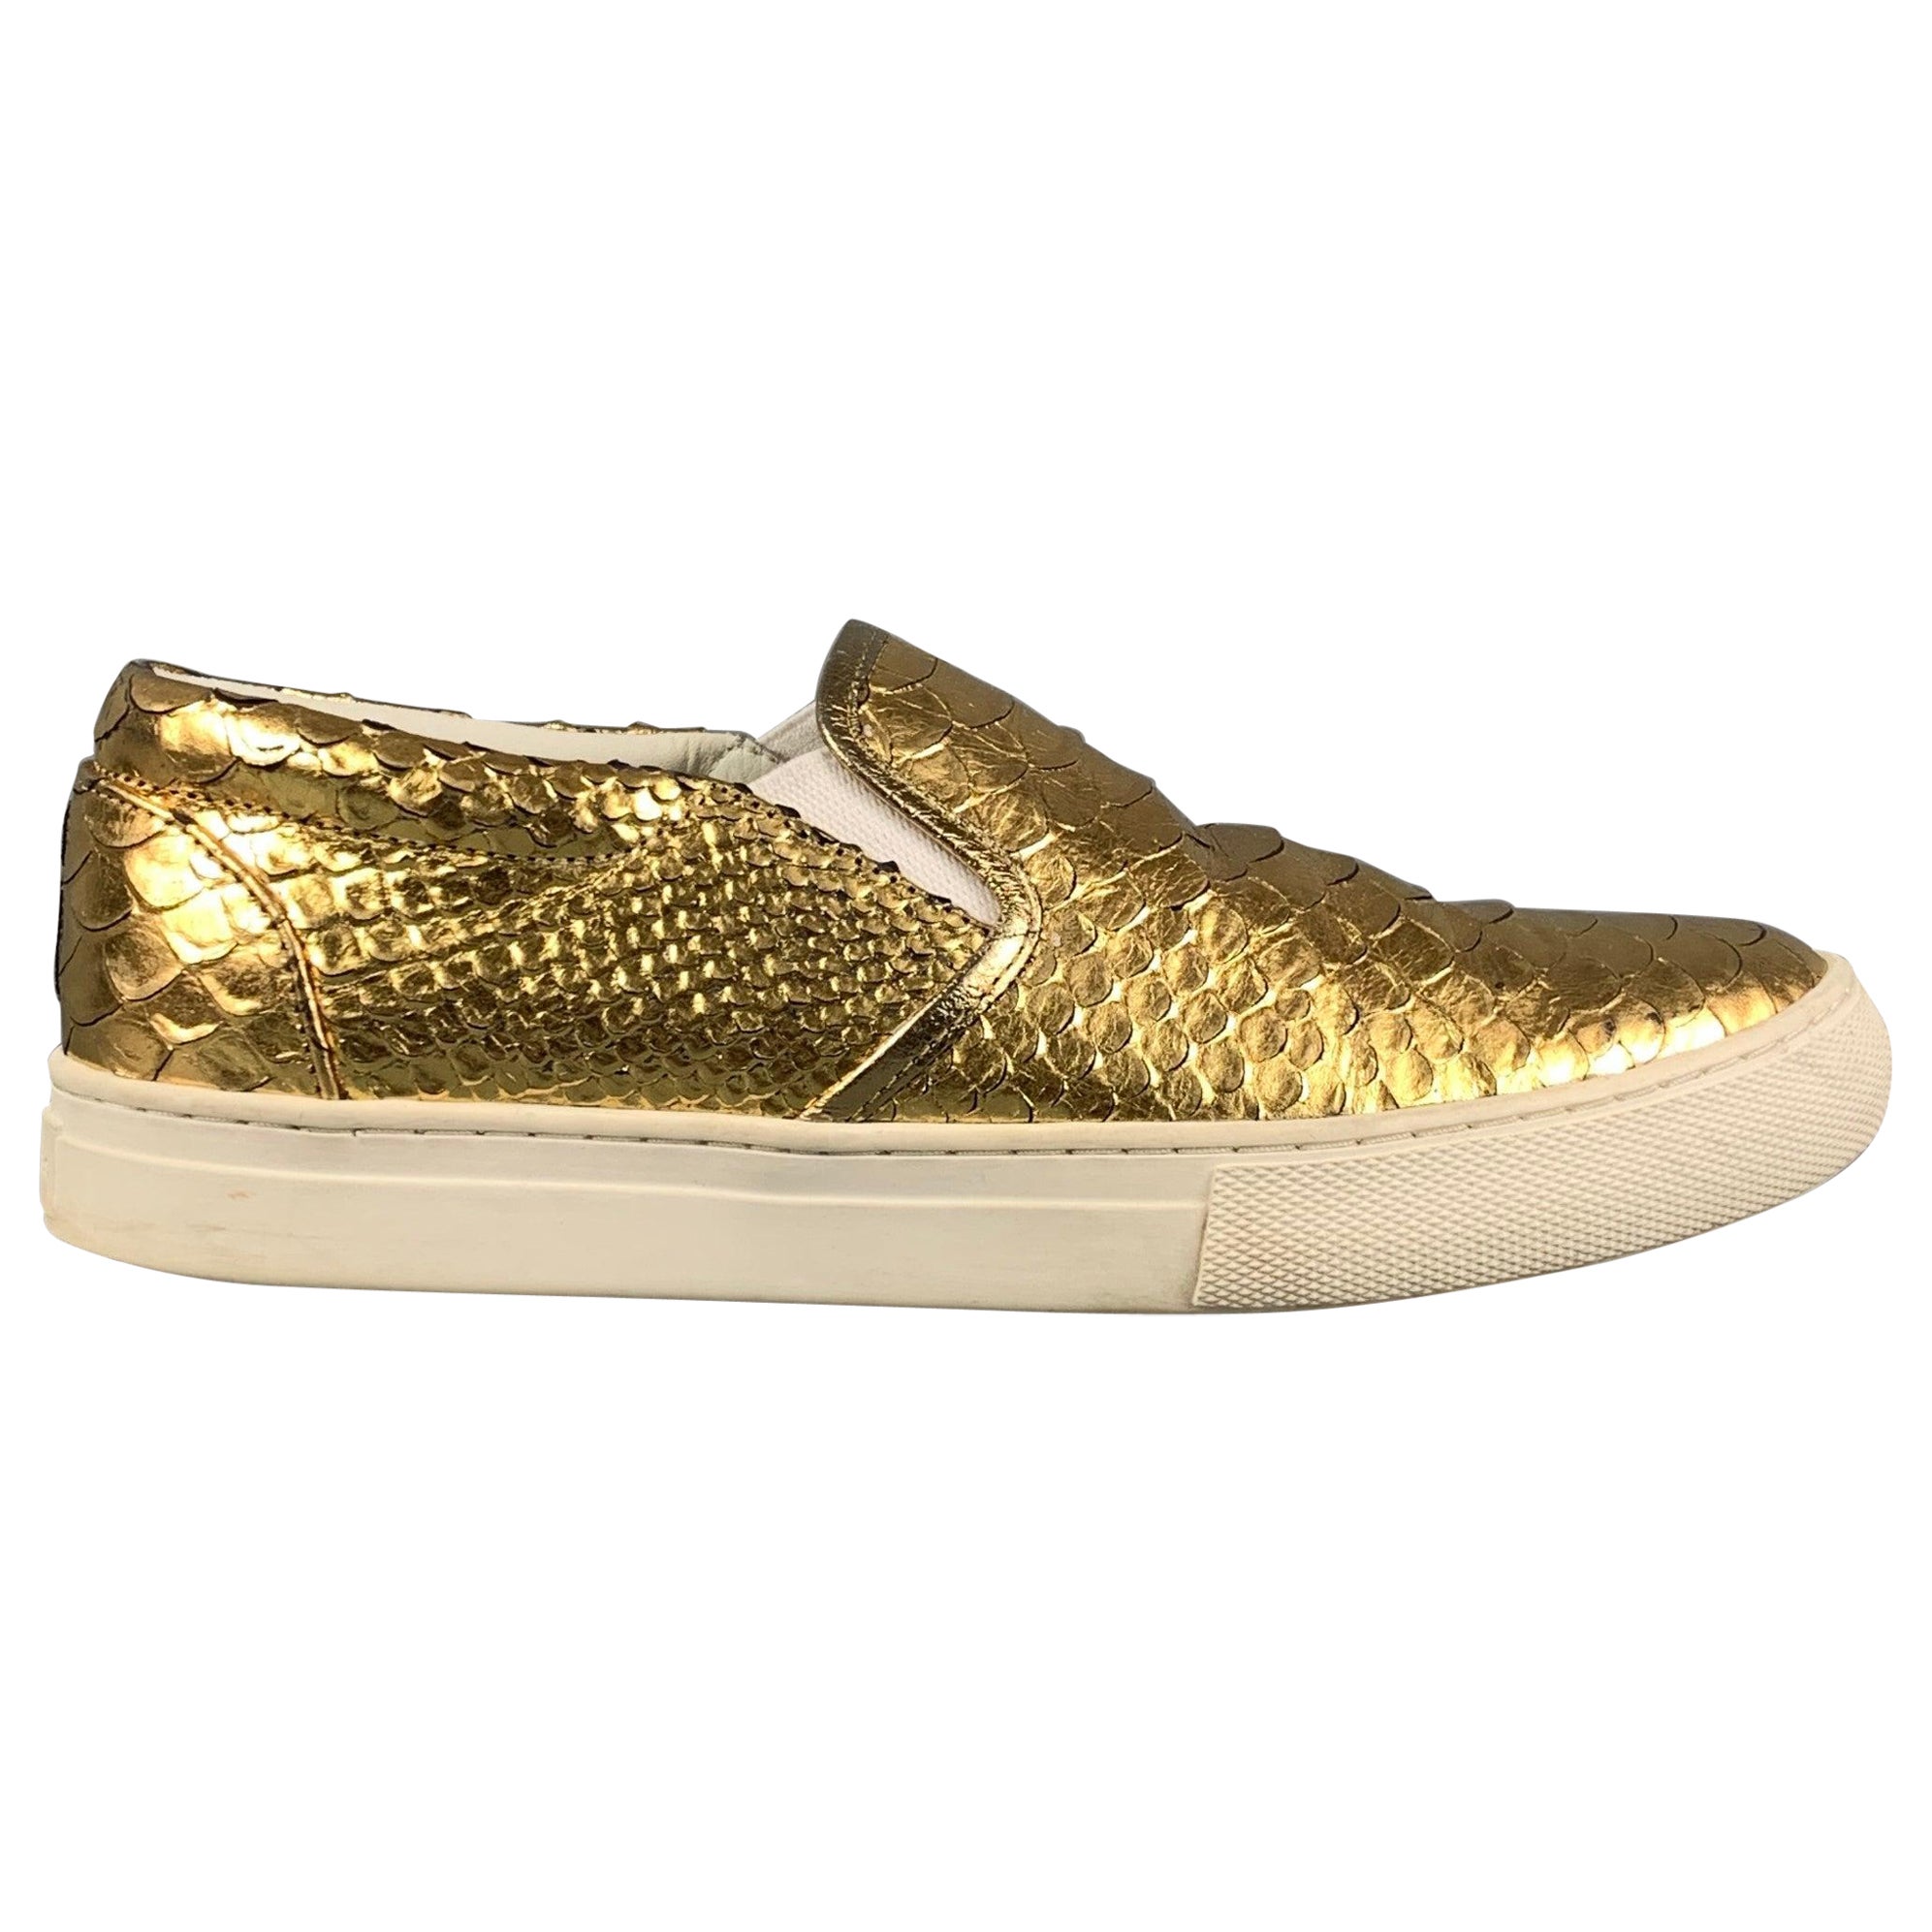 MARC JACOBS Size 7.5 Gold Textured Leather Slip On Sneakers For Sale